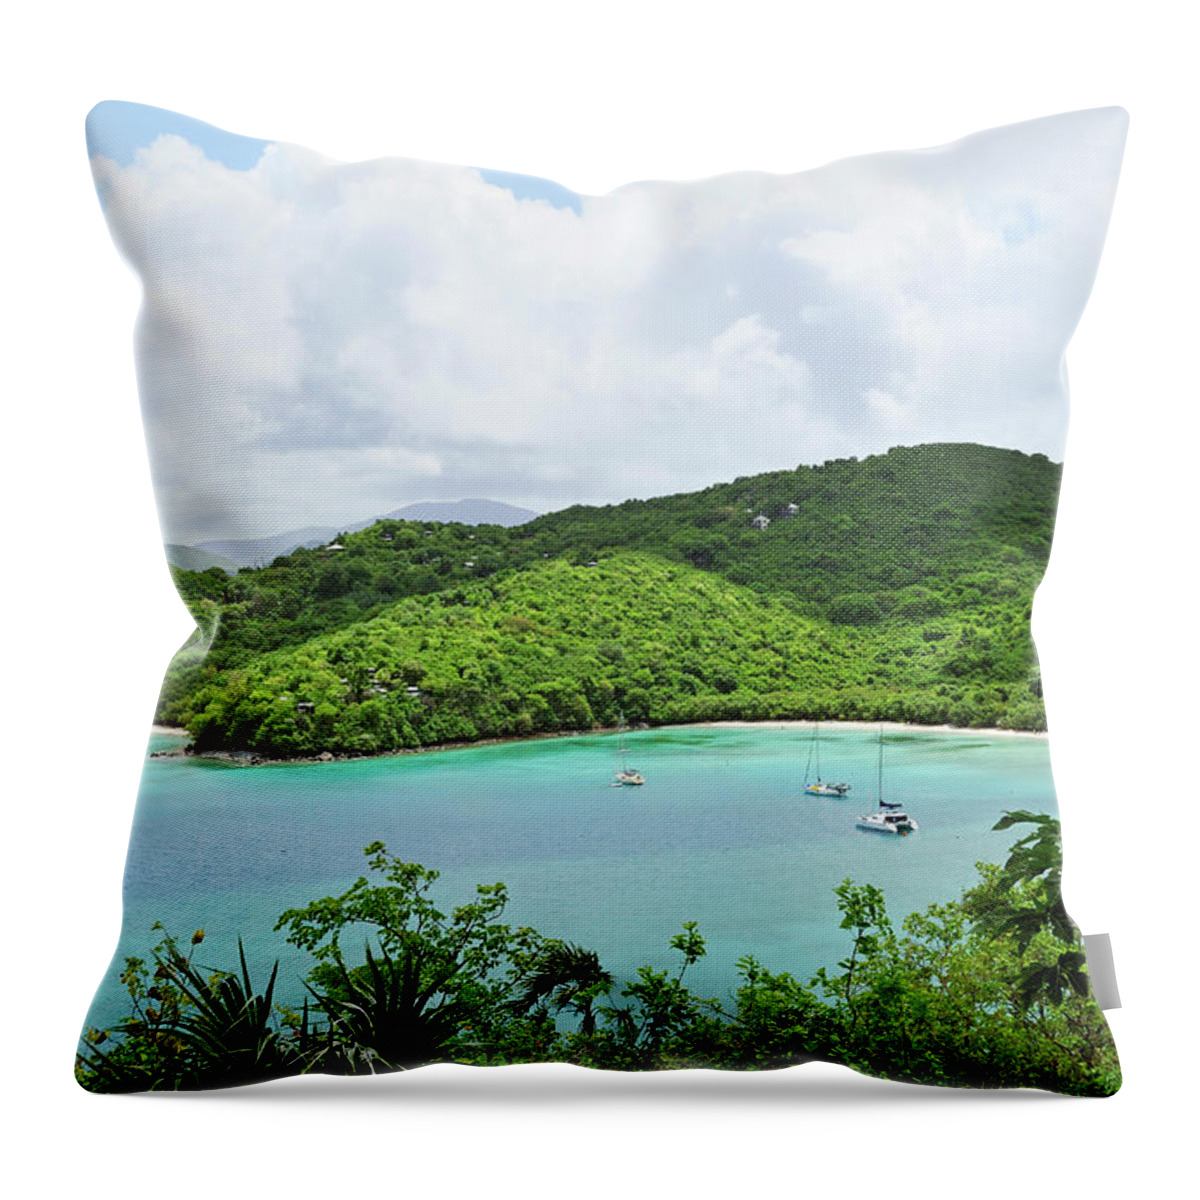 Scenics Throw Pillow featuring the photograph Maho Bay, St. John by Driendl Group